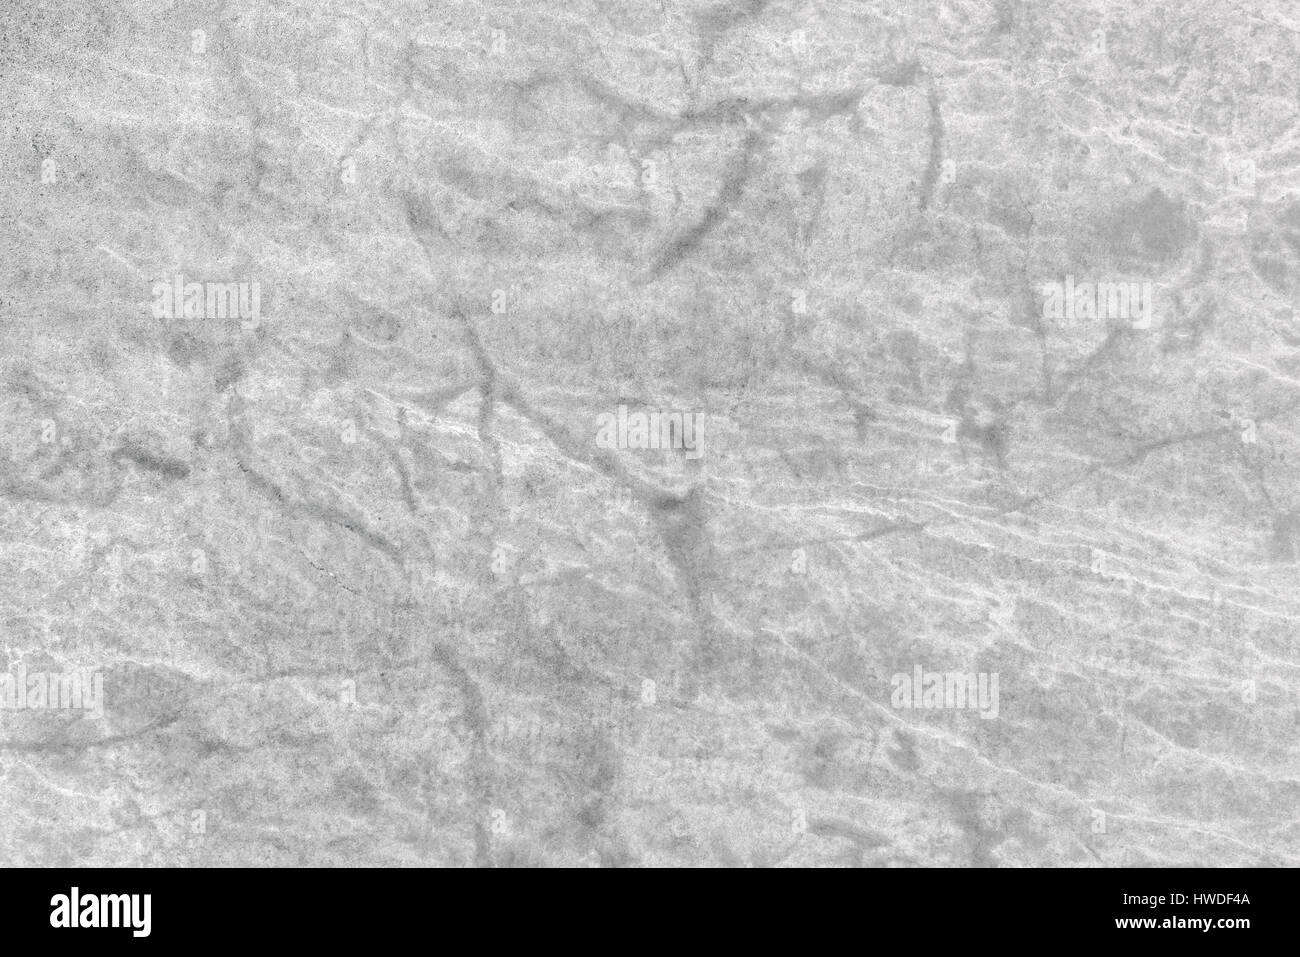 Light gray polished marble stone tile background, real natural unique texture of construction material surface Stock Photo